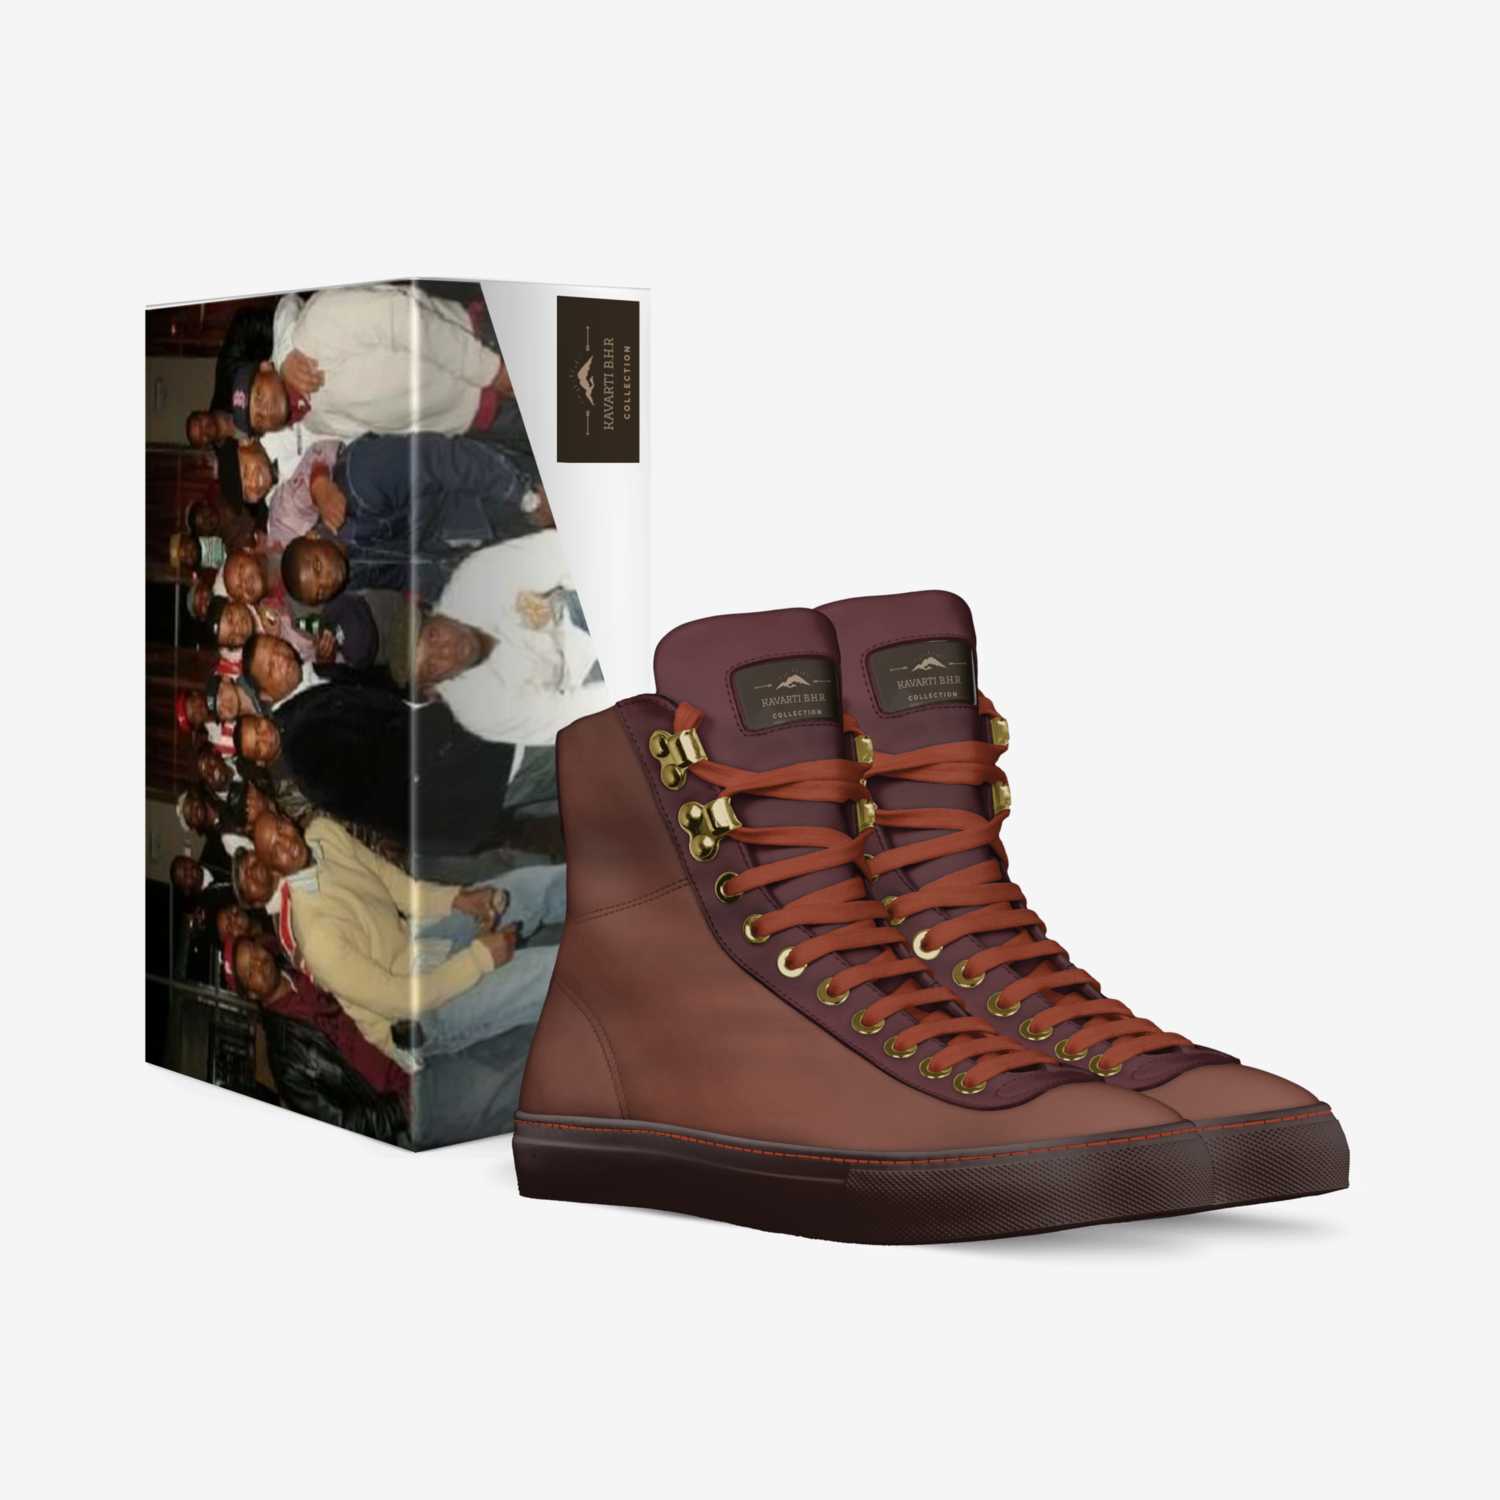 Randolph  Carteret custom made in Italy shoes by Kevin Bartee | Box view